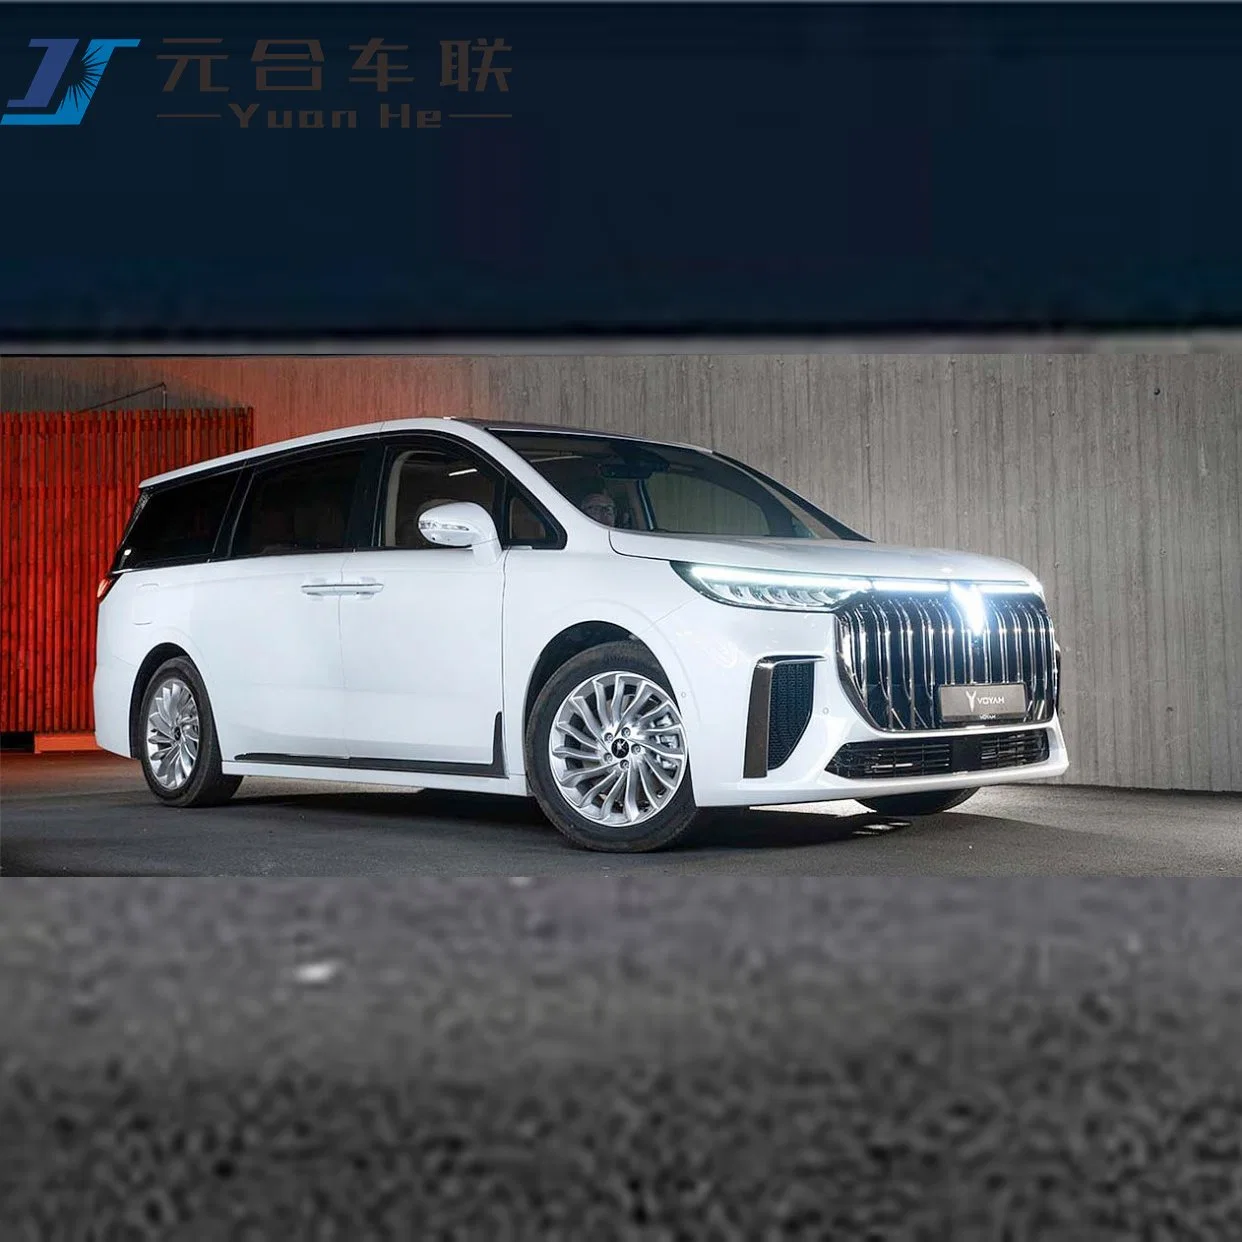 The Voyah Dream Car Is a Private Reservation of 0, 605km Used Car Electric Car High Quality and Comfortable